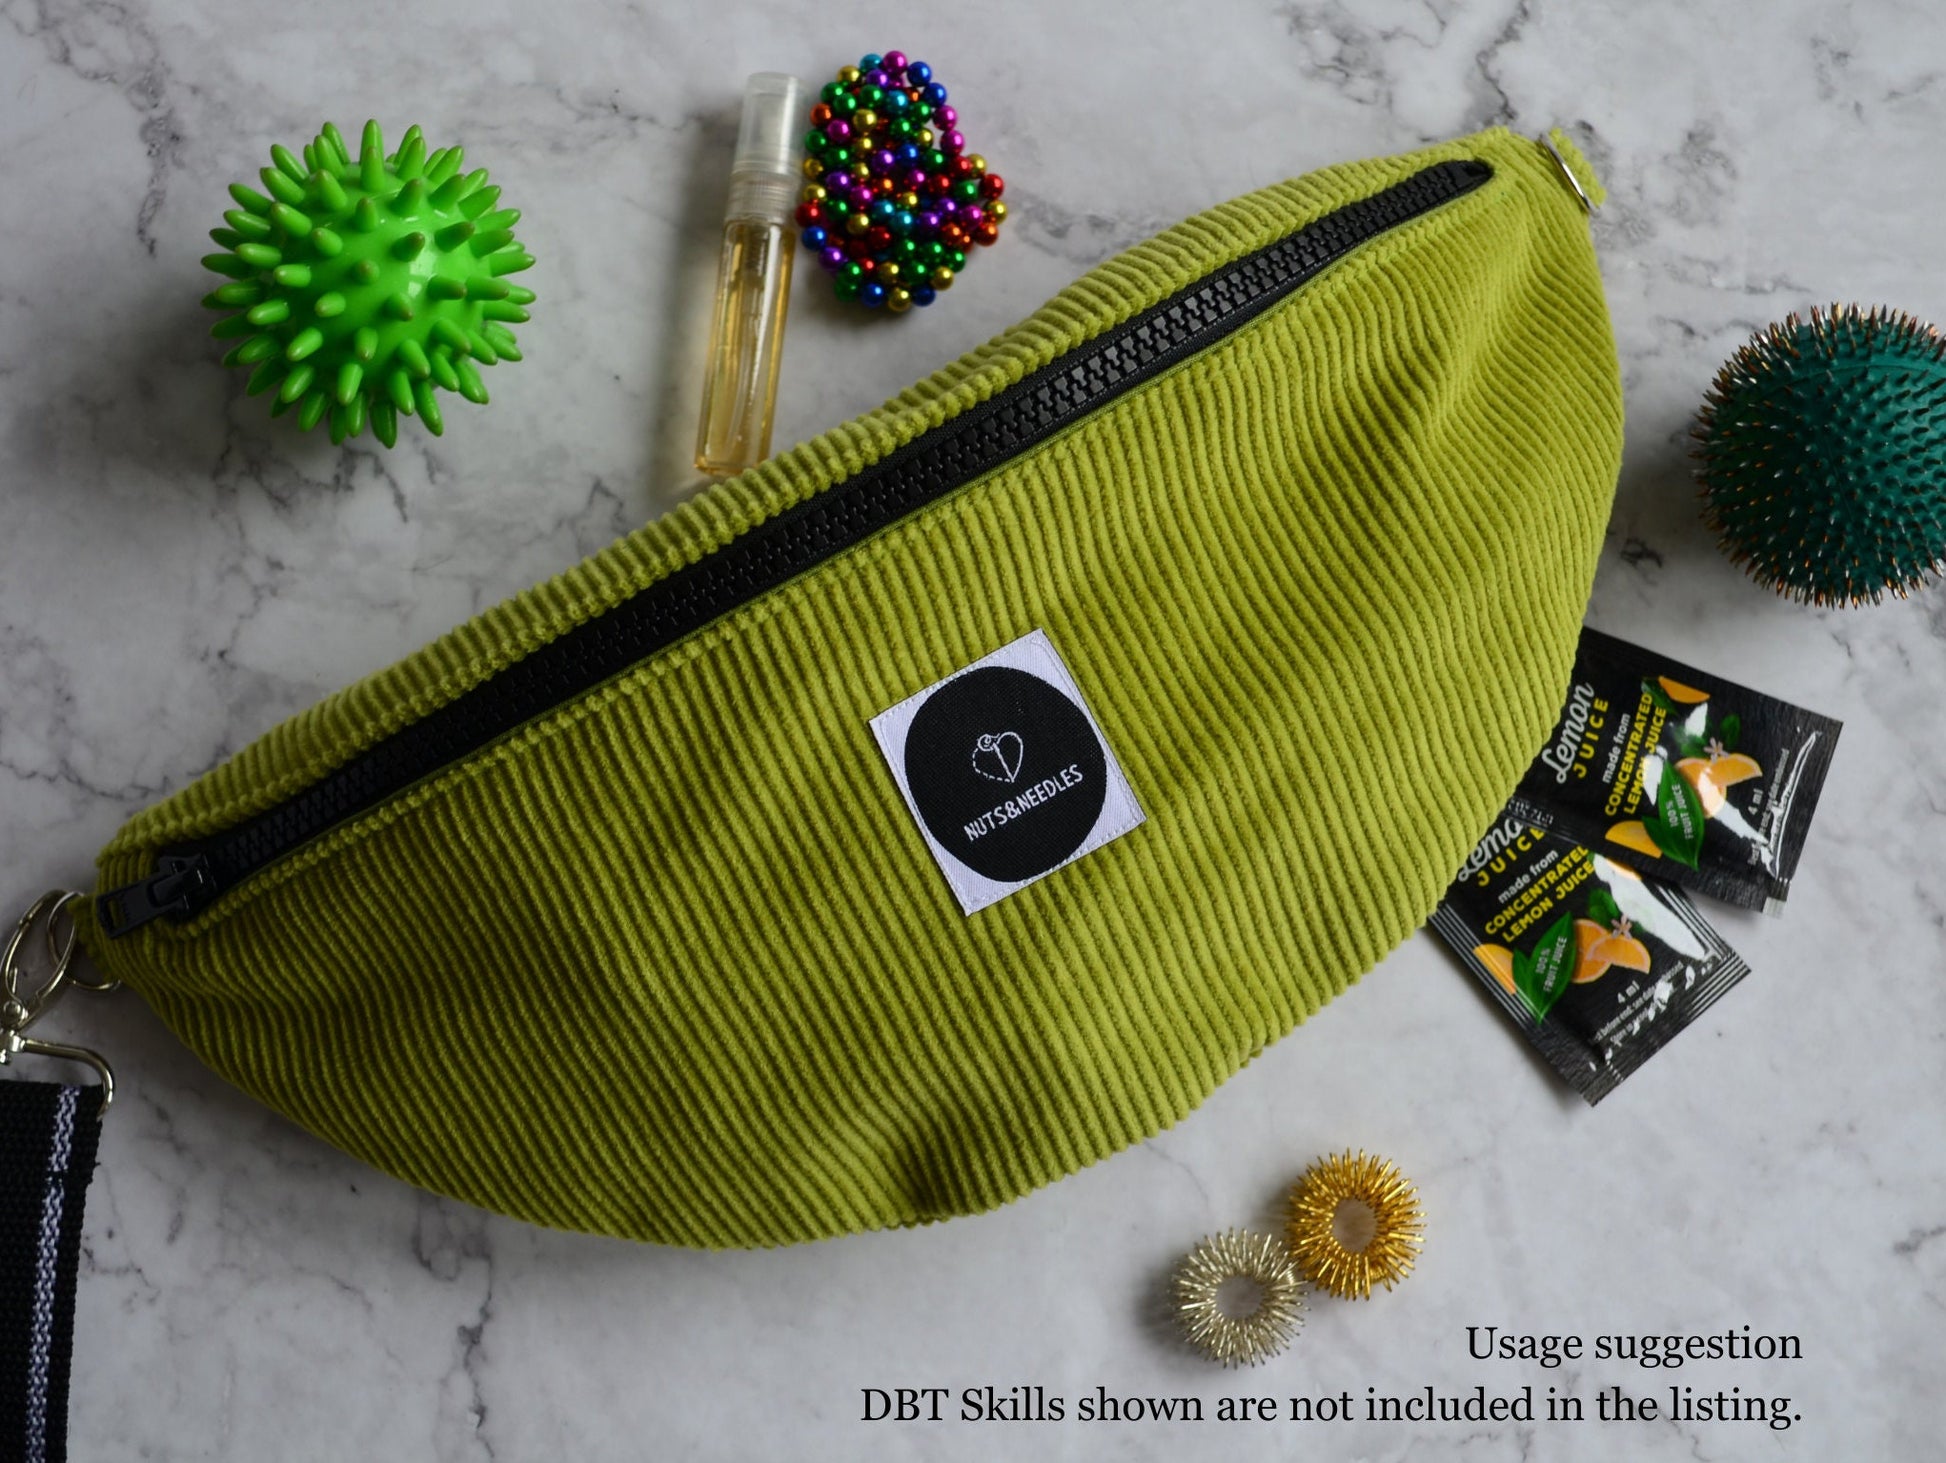 Skills Bag Depression Awareness, part of profit donated to charity, Mental Health, handmade Fanny Pack for fidget toys, DBT Skill, Depressed